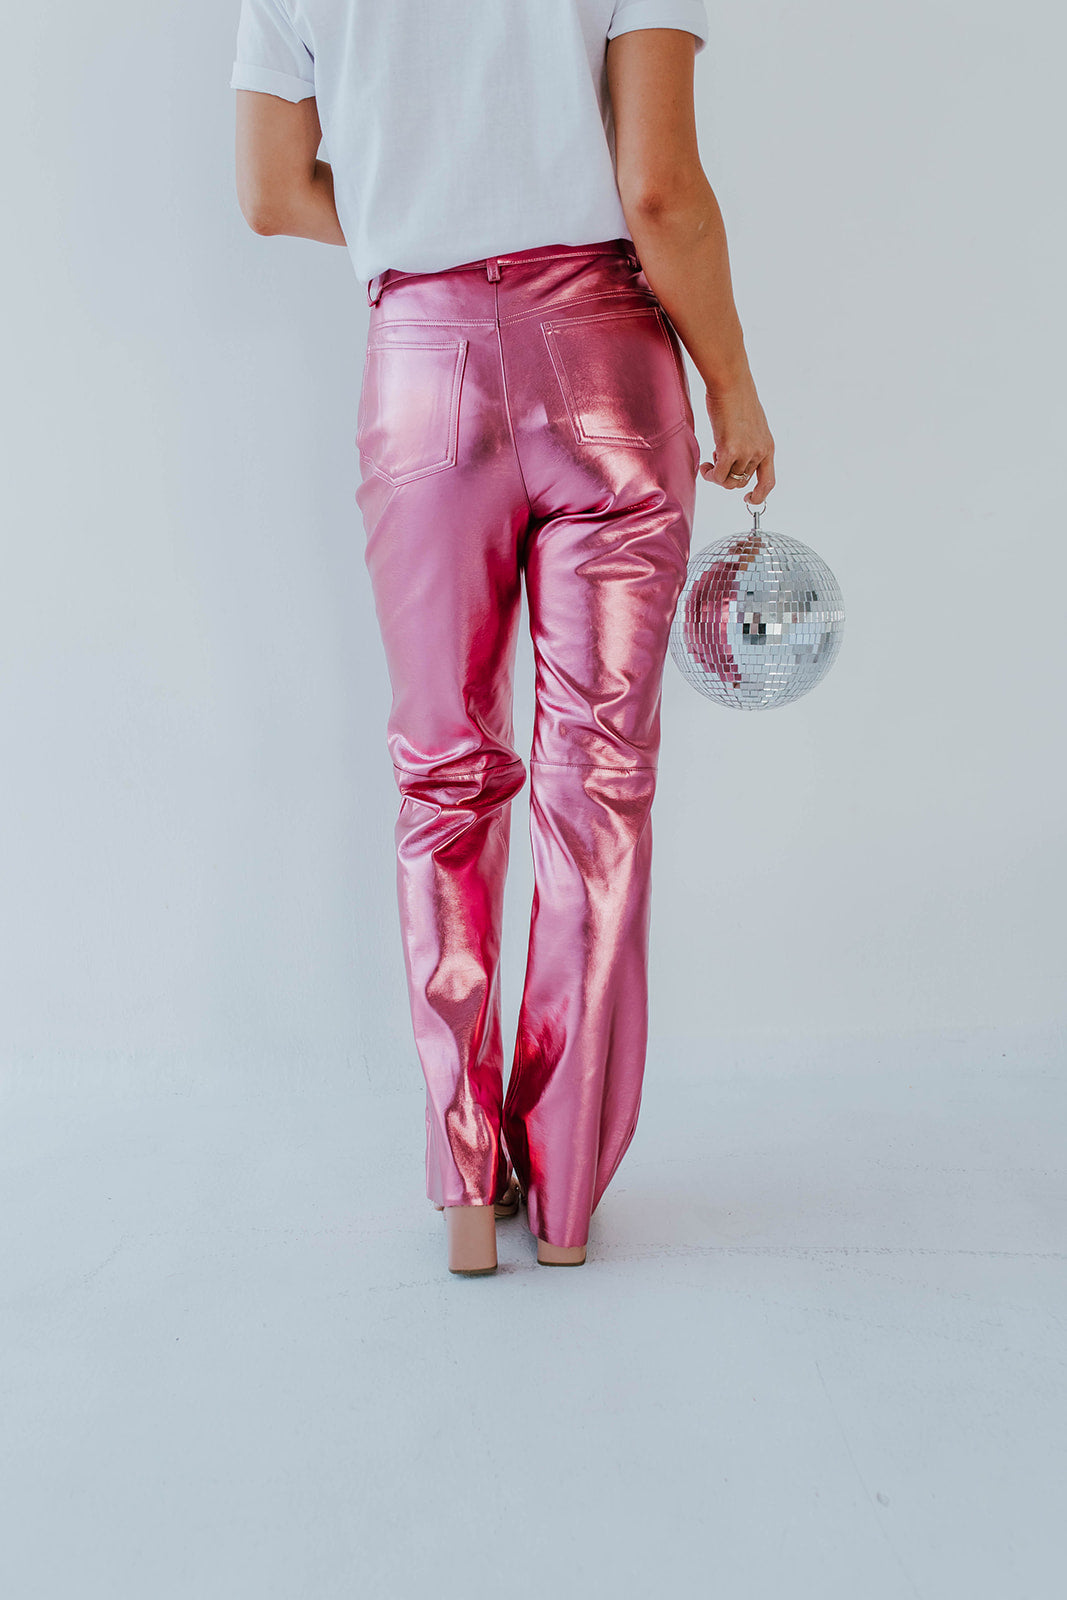 DAYTIME DISCO FAUX LEATHER LEGGING in pink